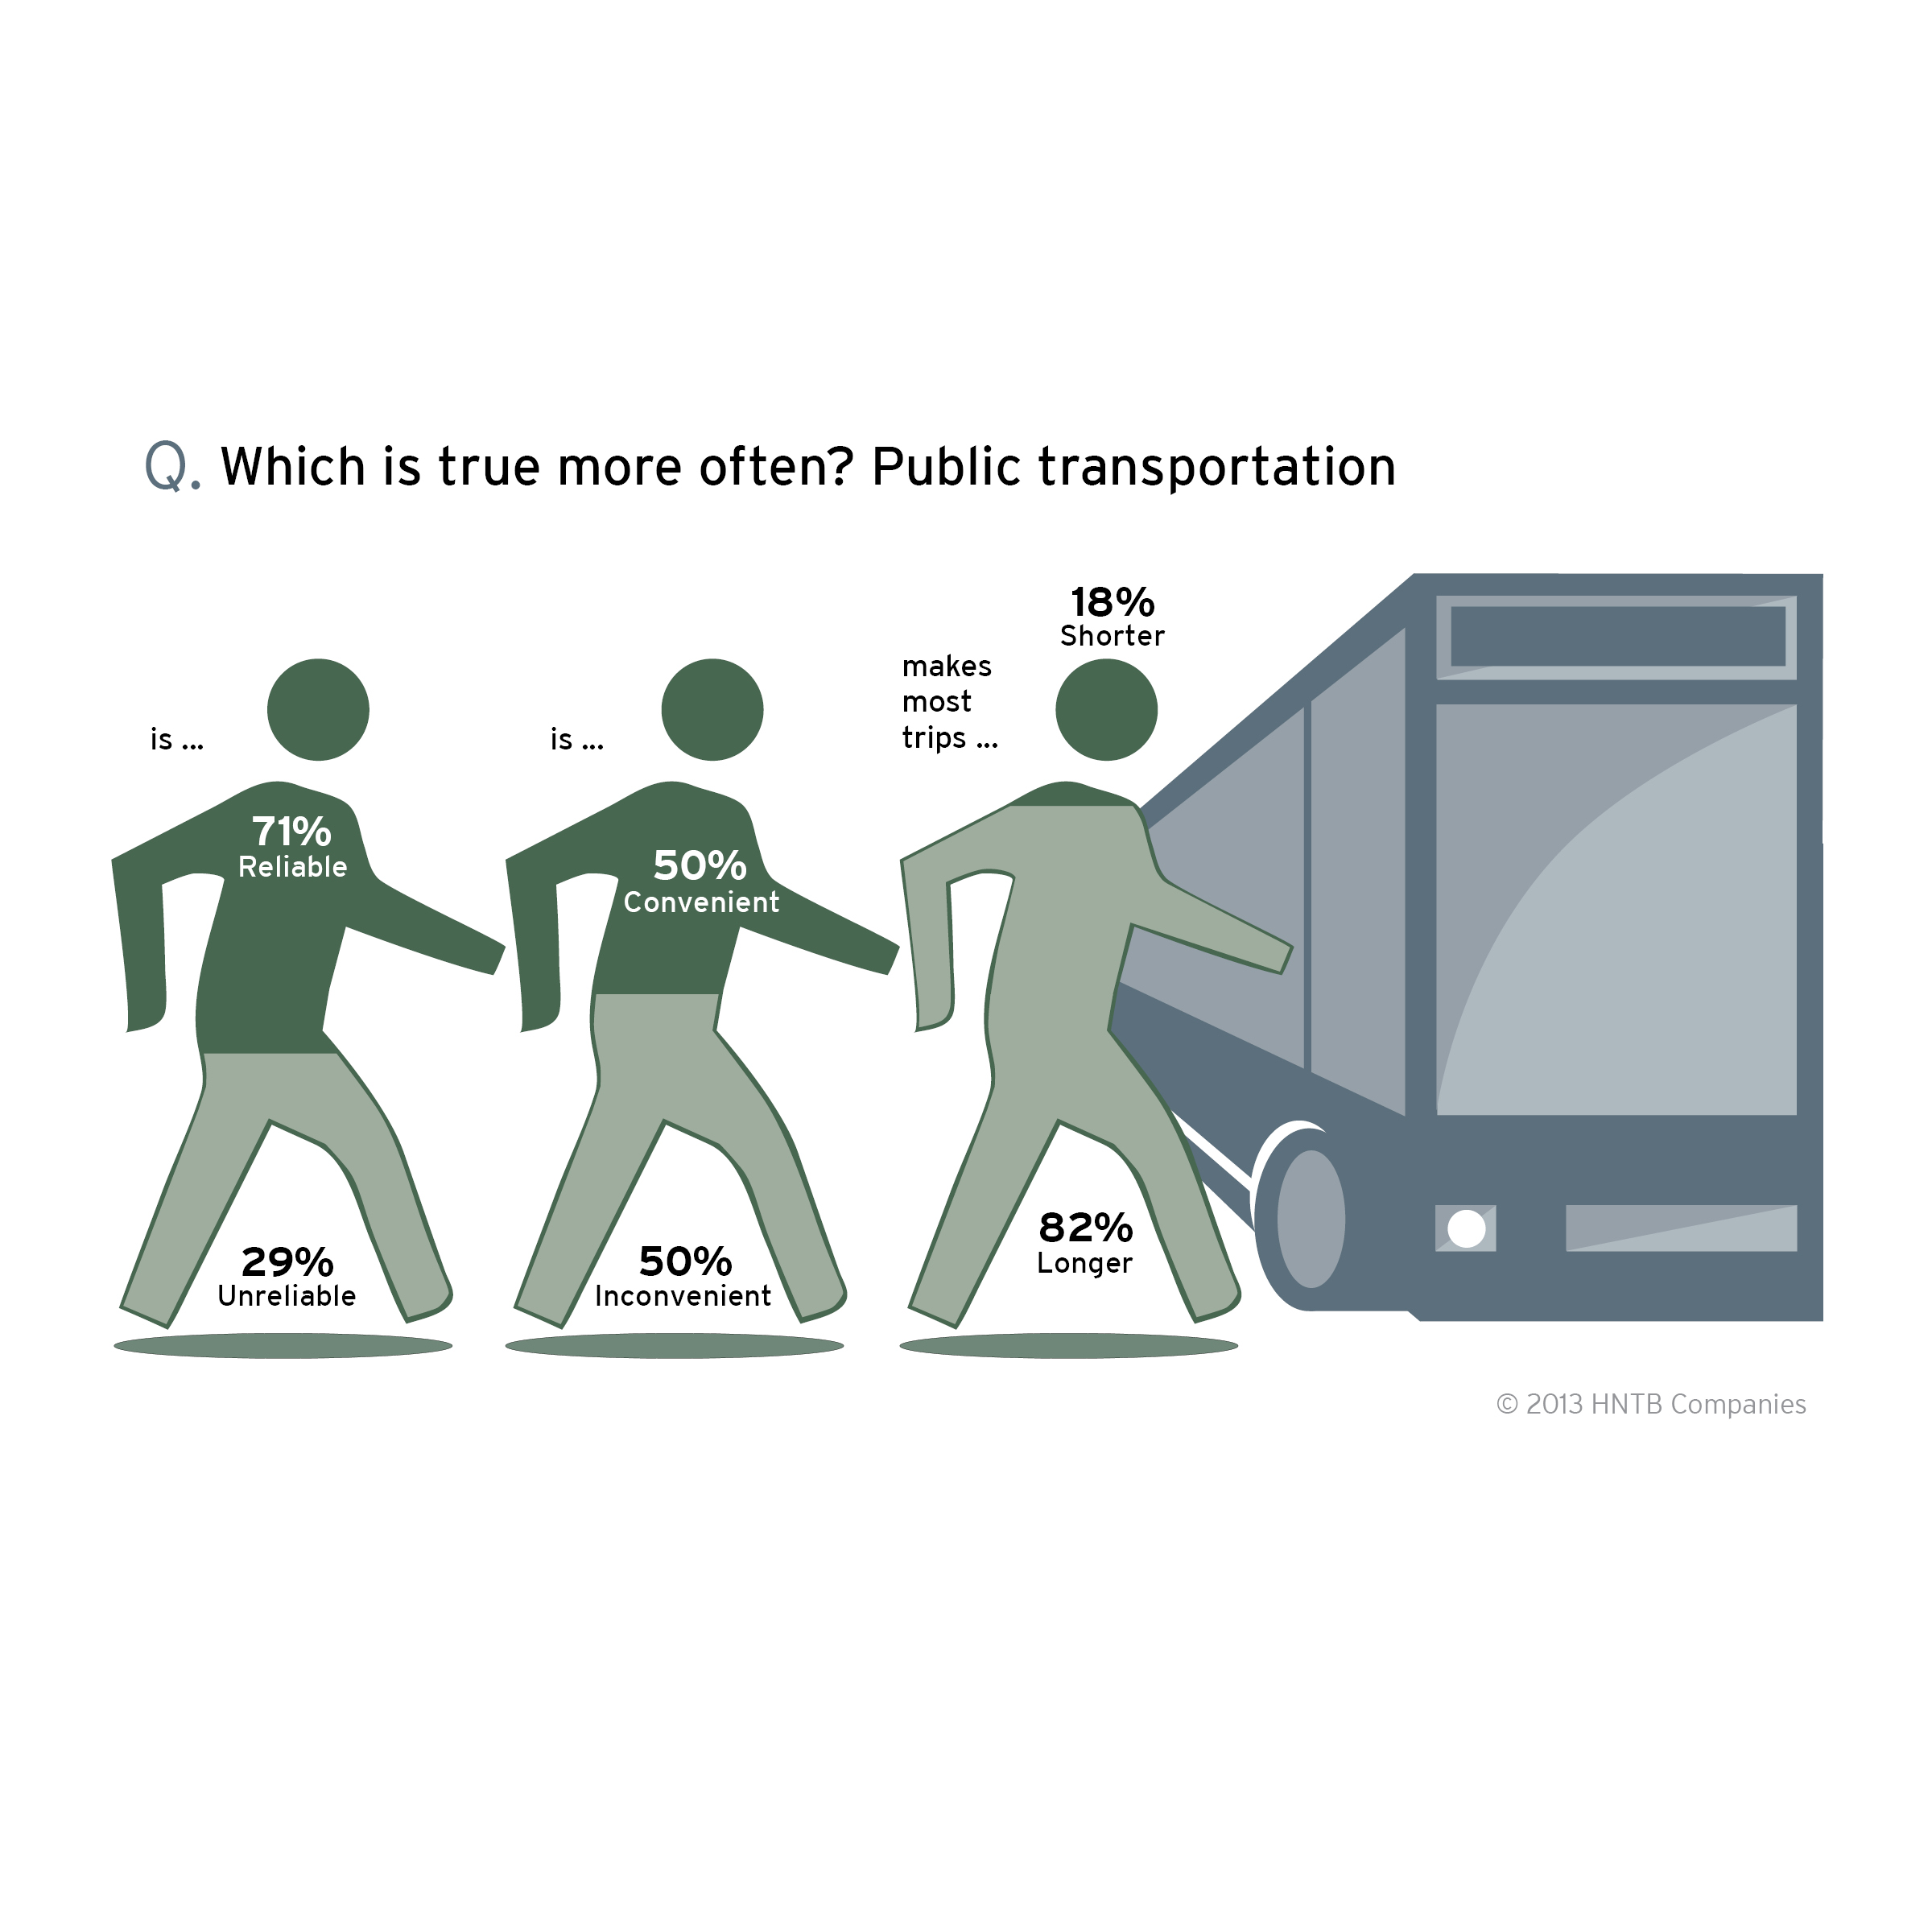 According to a recent HNTB survey, many Americans see public transportation as reliable (71 percent), half (50 percent) see it as convenient, but most see it as a longer (82 percent) ride.